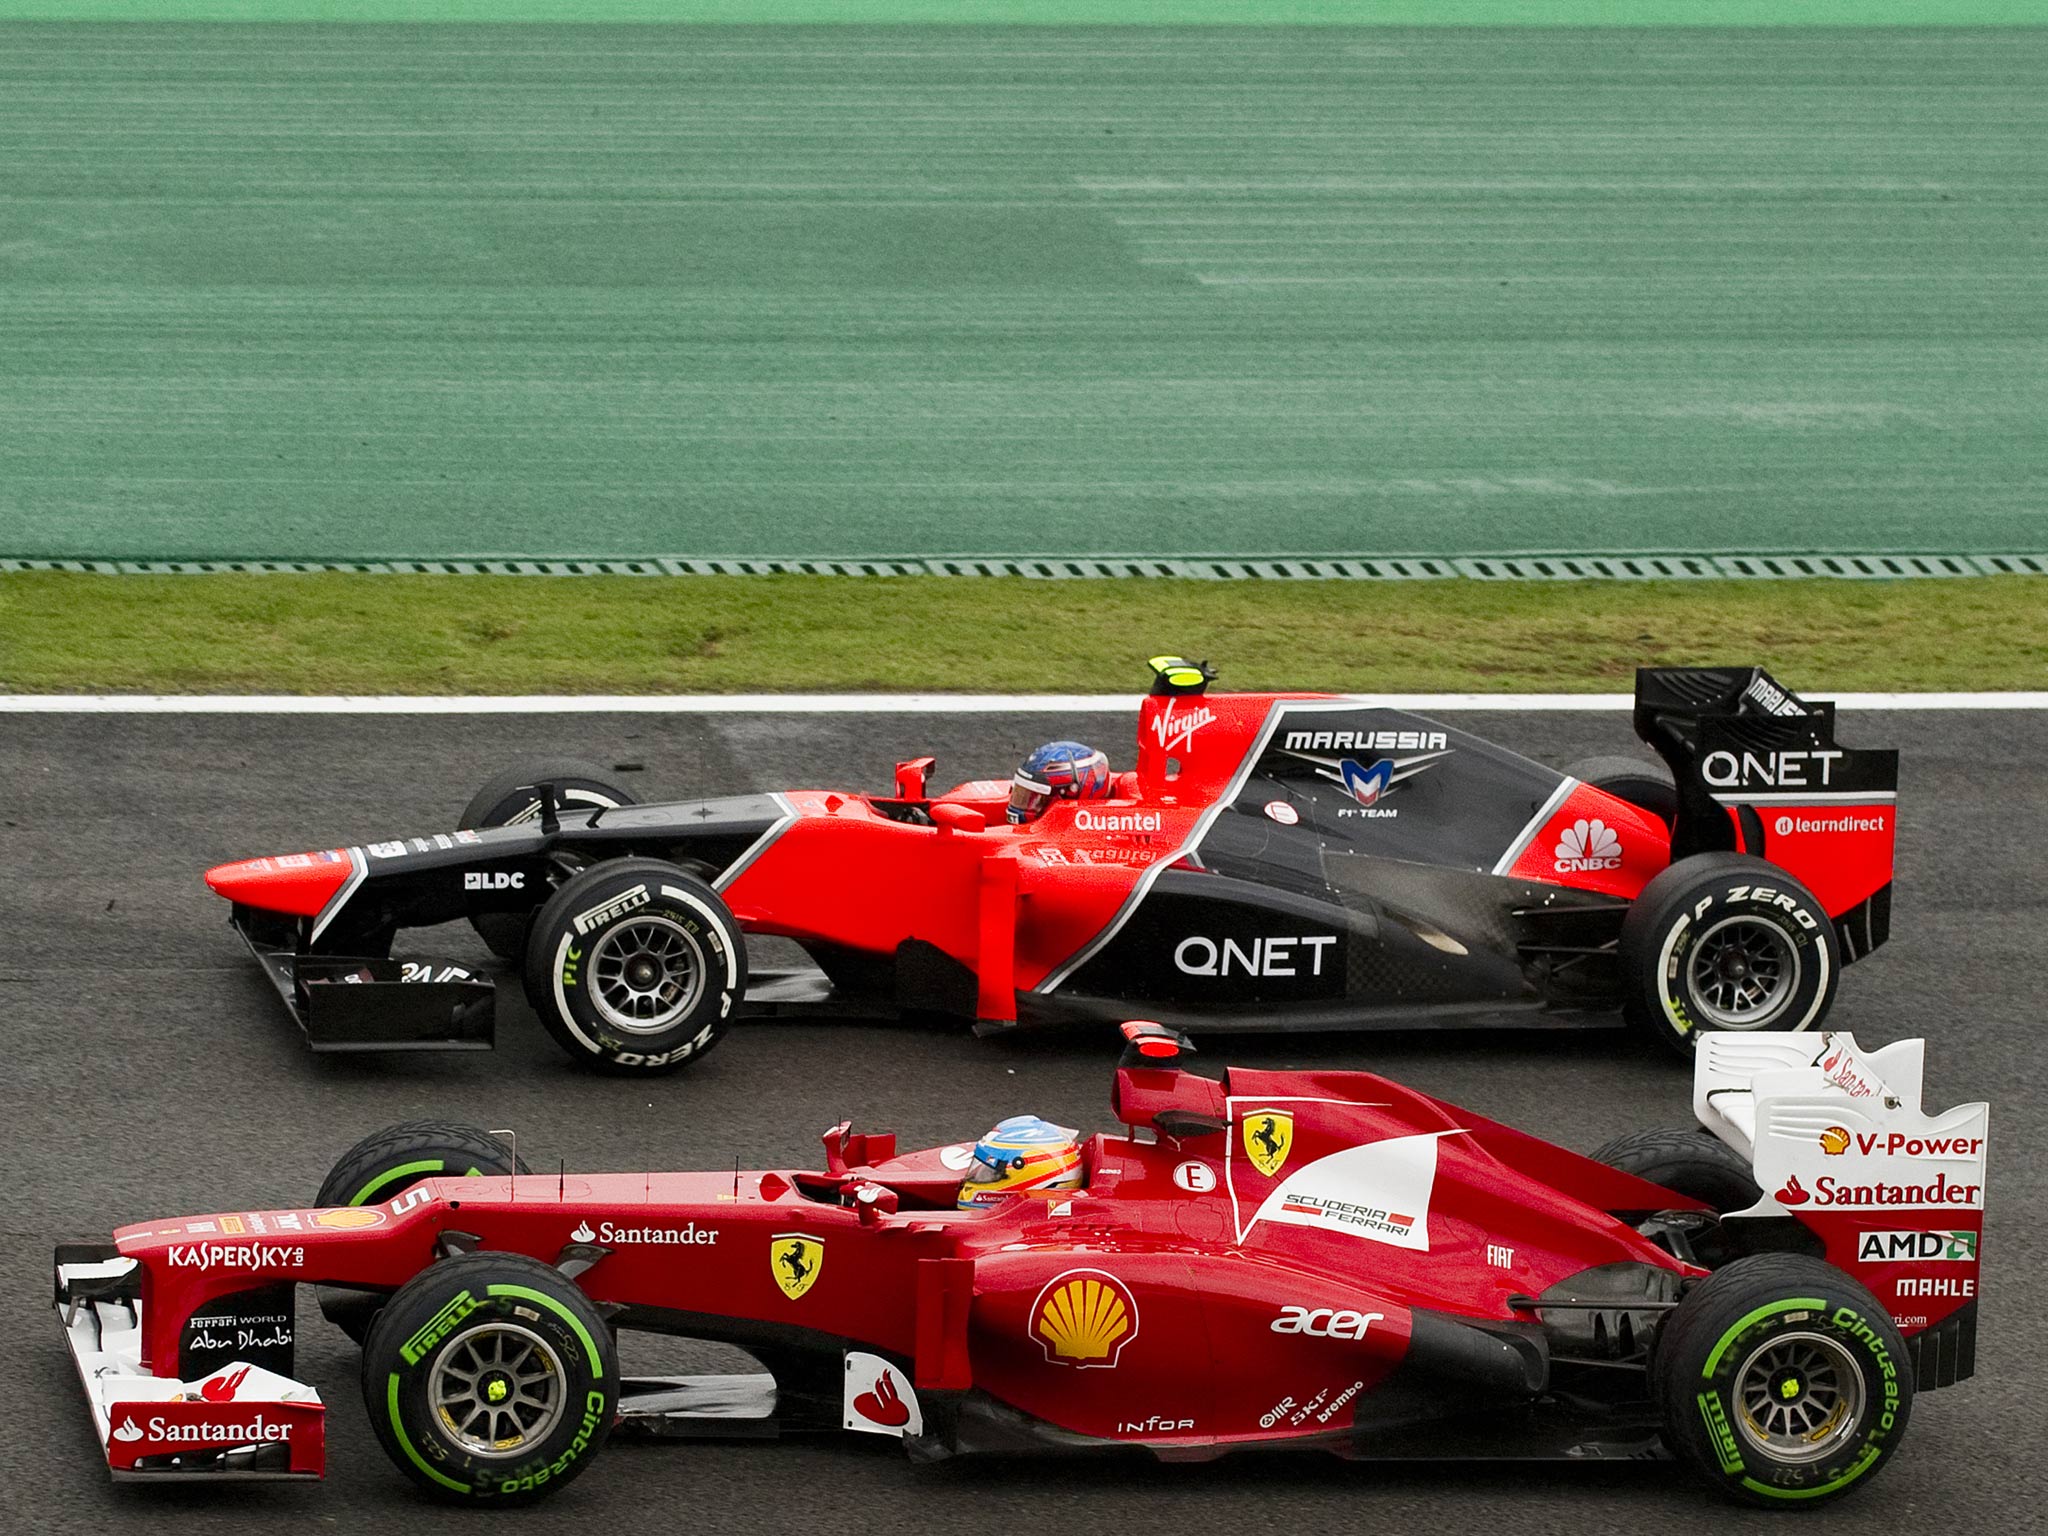 Spanish Formula One driver Fernando Alonso (front) powers his Ferrari to overtake Charles Pic of Marussia during testing